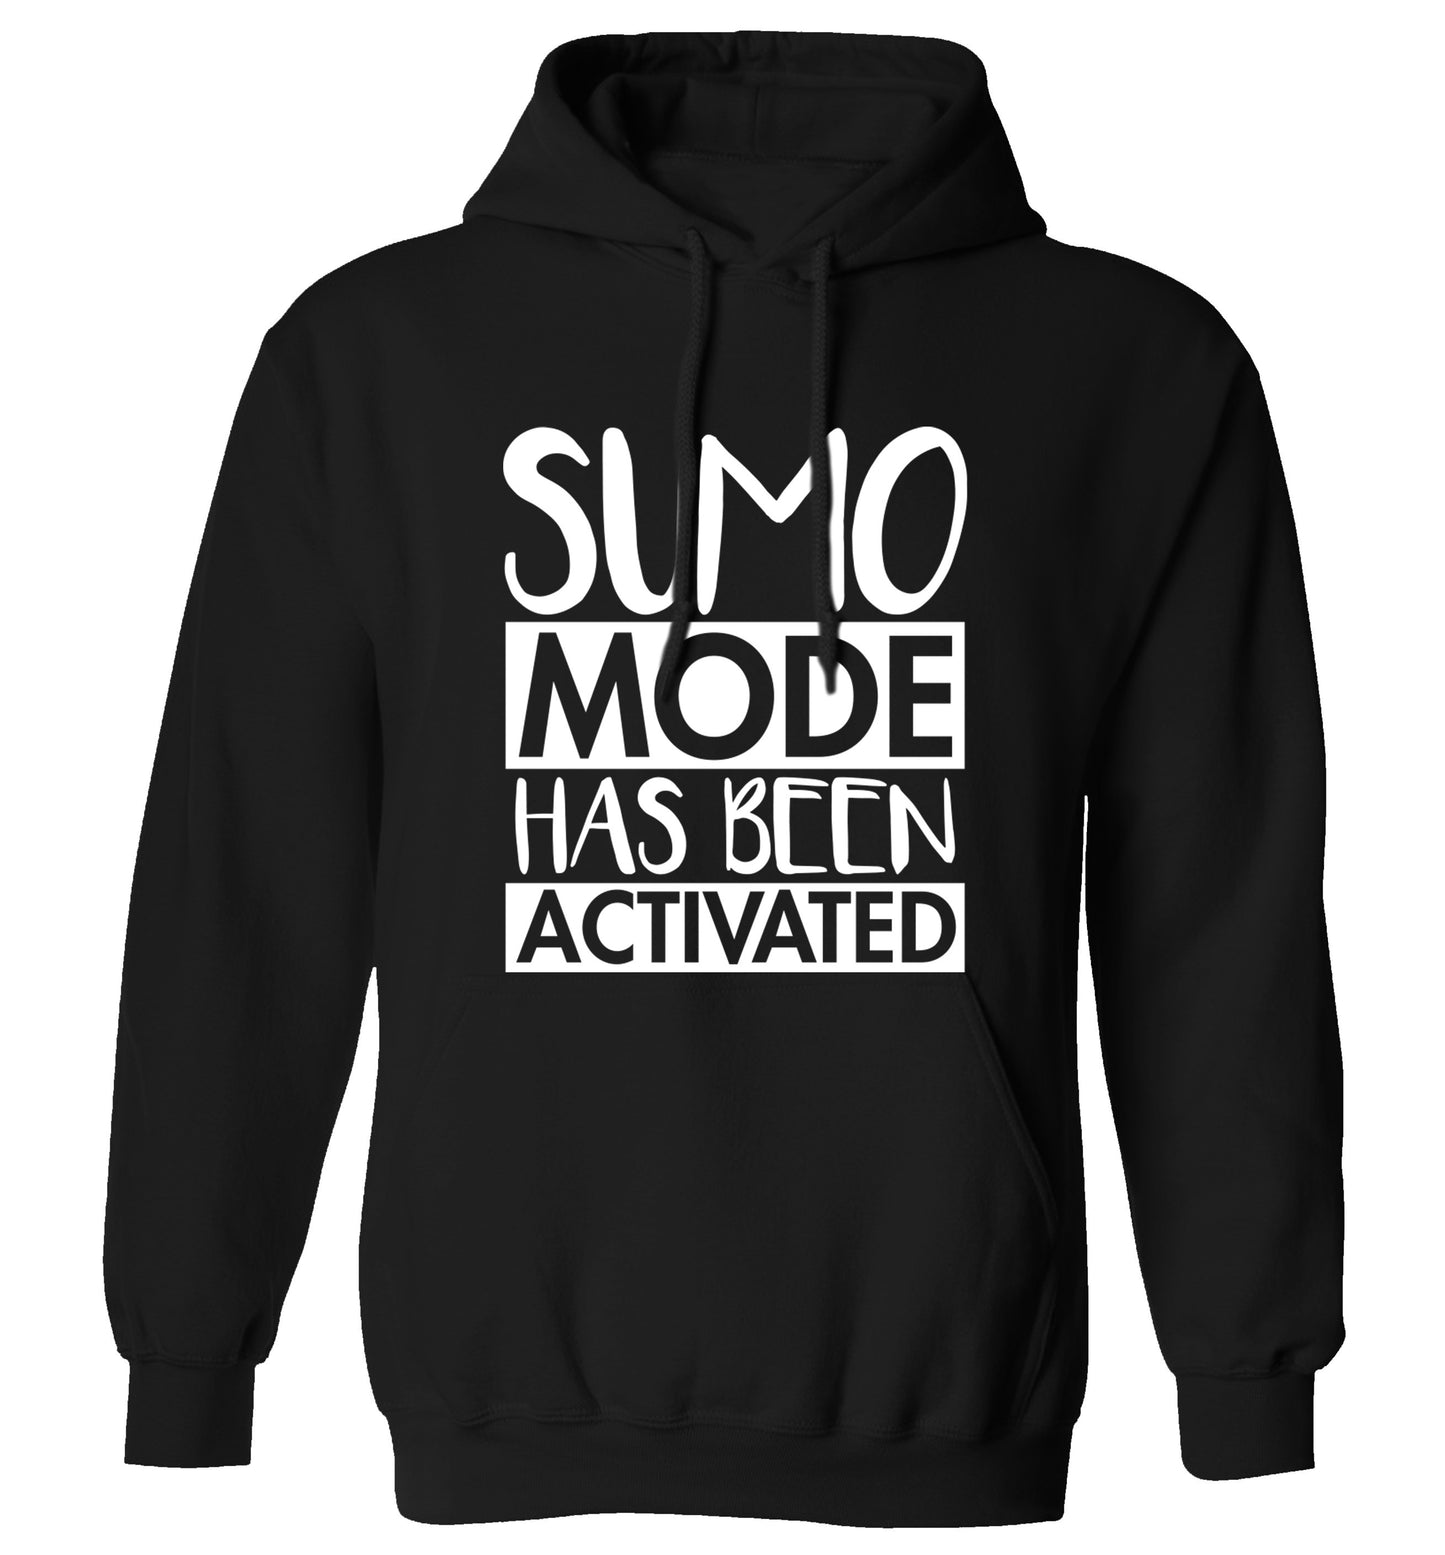 Sumo mode activated adults unisex black hoodie 2XL